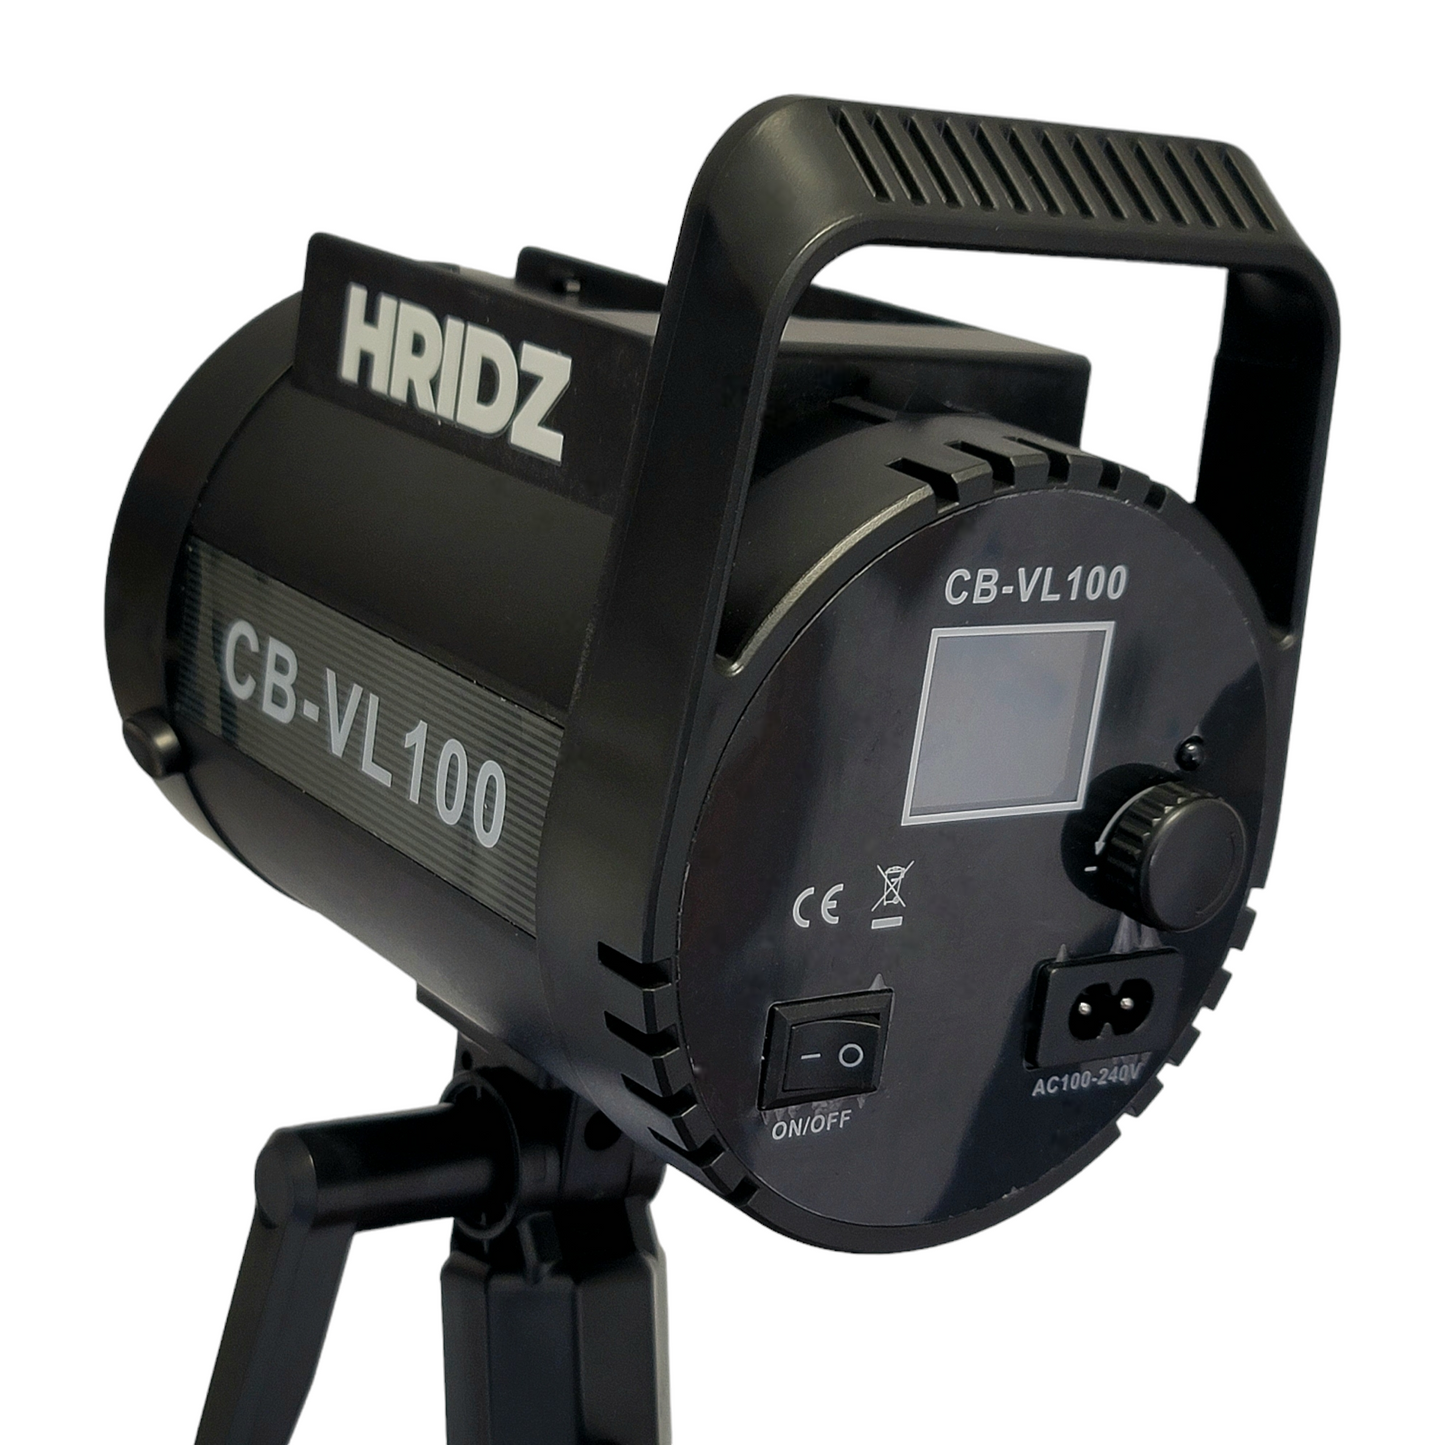 HRIDZ CB-VL100 100W Battery-Operated Bi-Colour LED Video Light Professional Outdoor Indoor Video Light, Remote Controlled